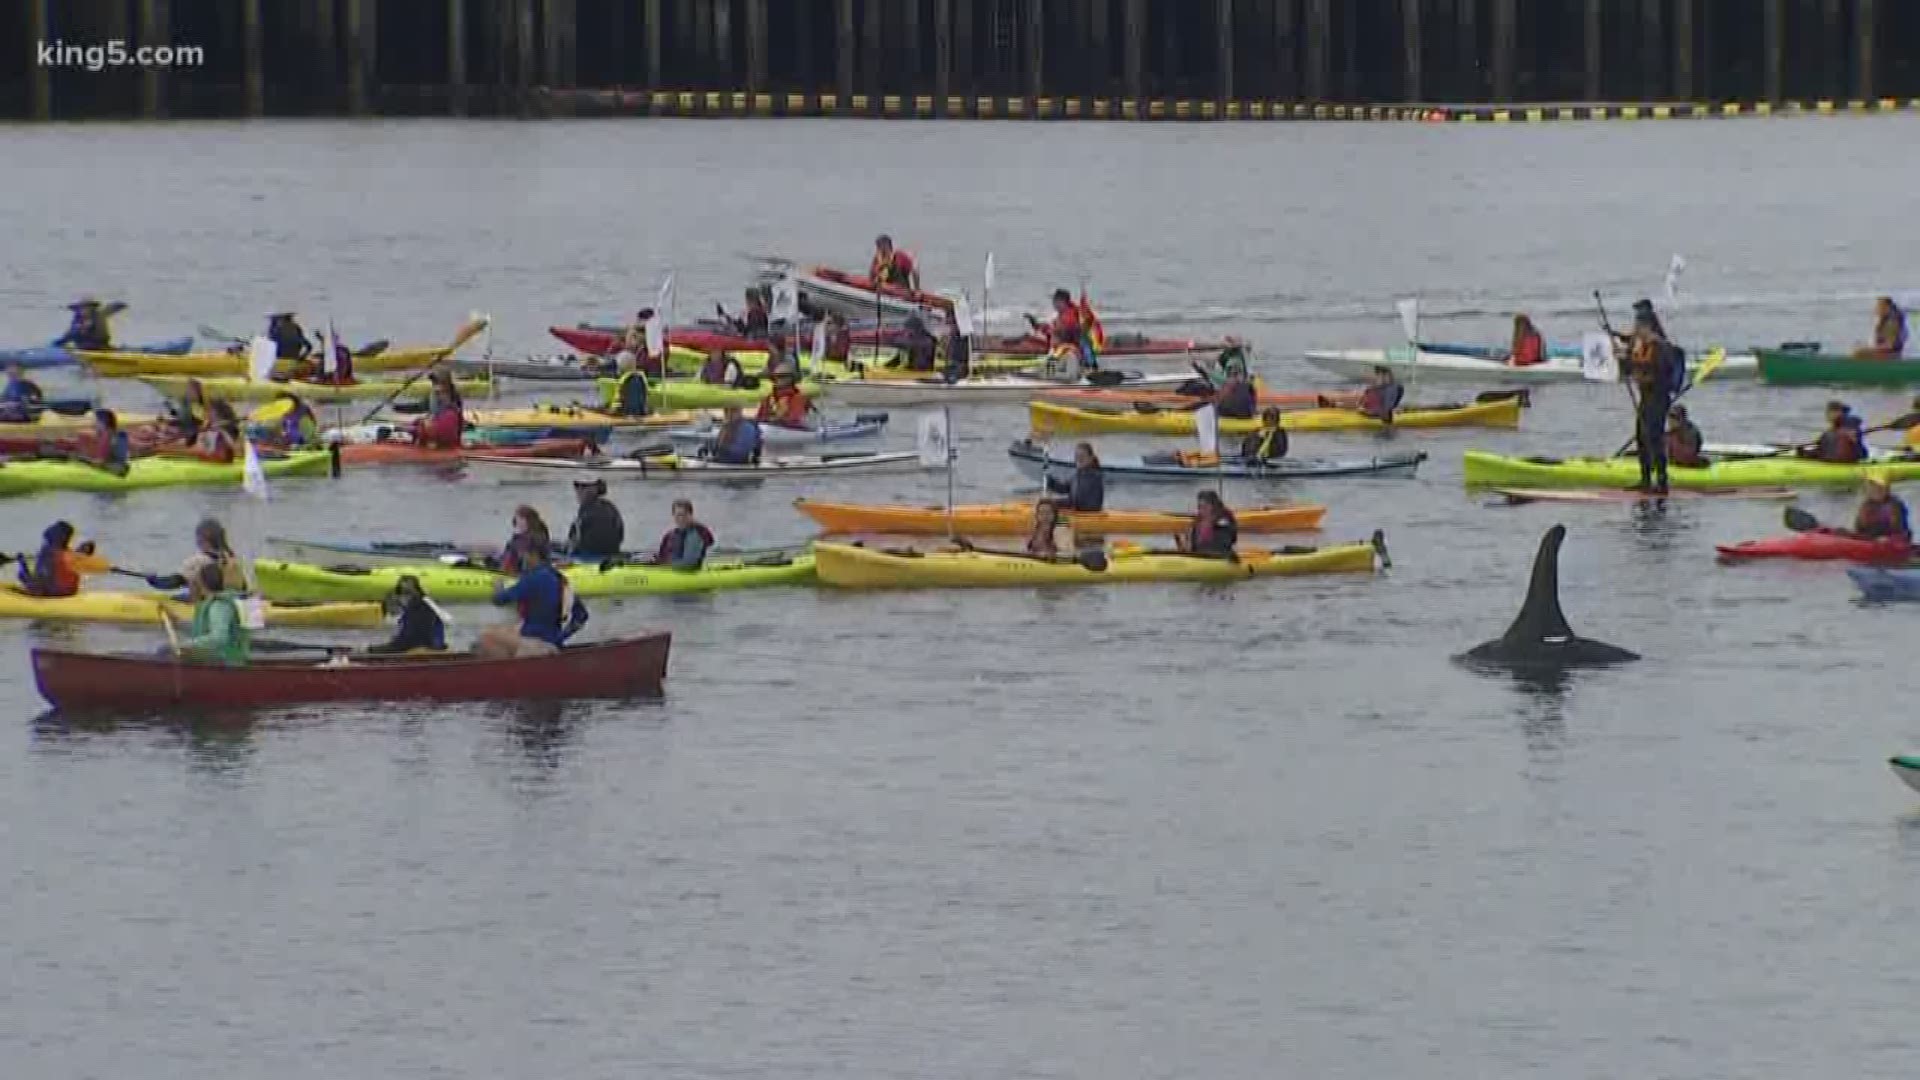 The protesters fear a disaster in the shared waters between Canada and Washington